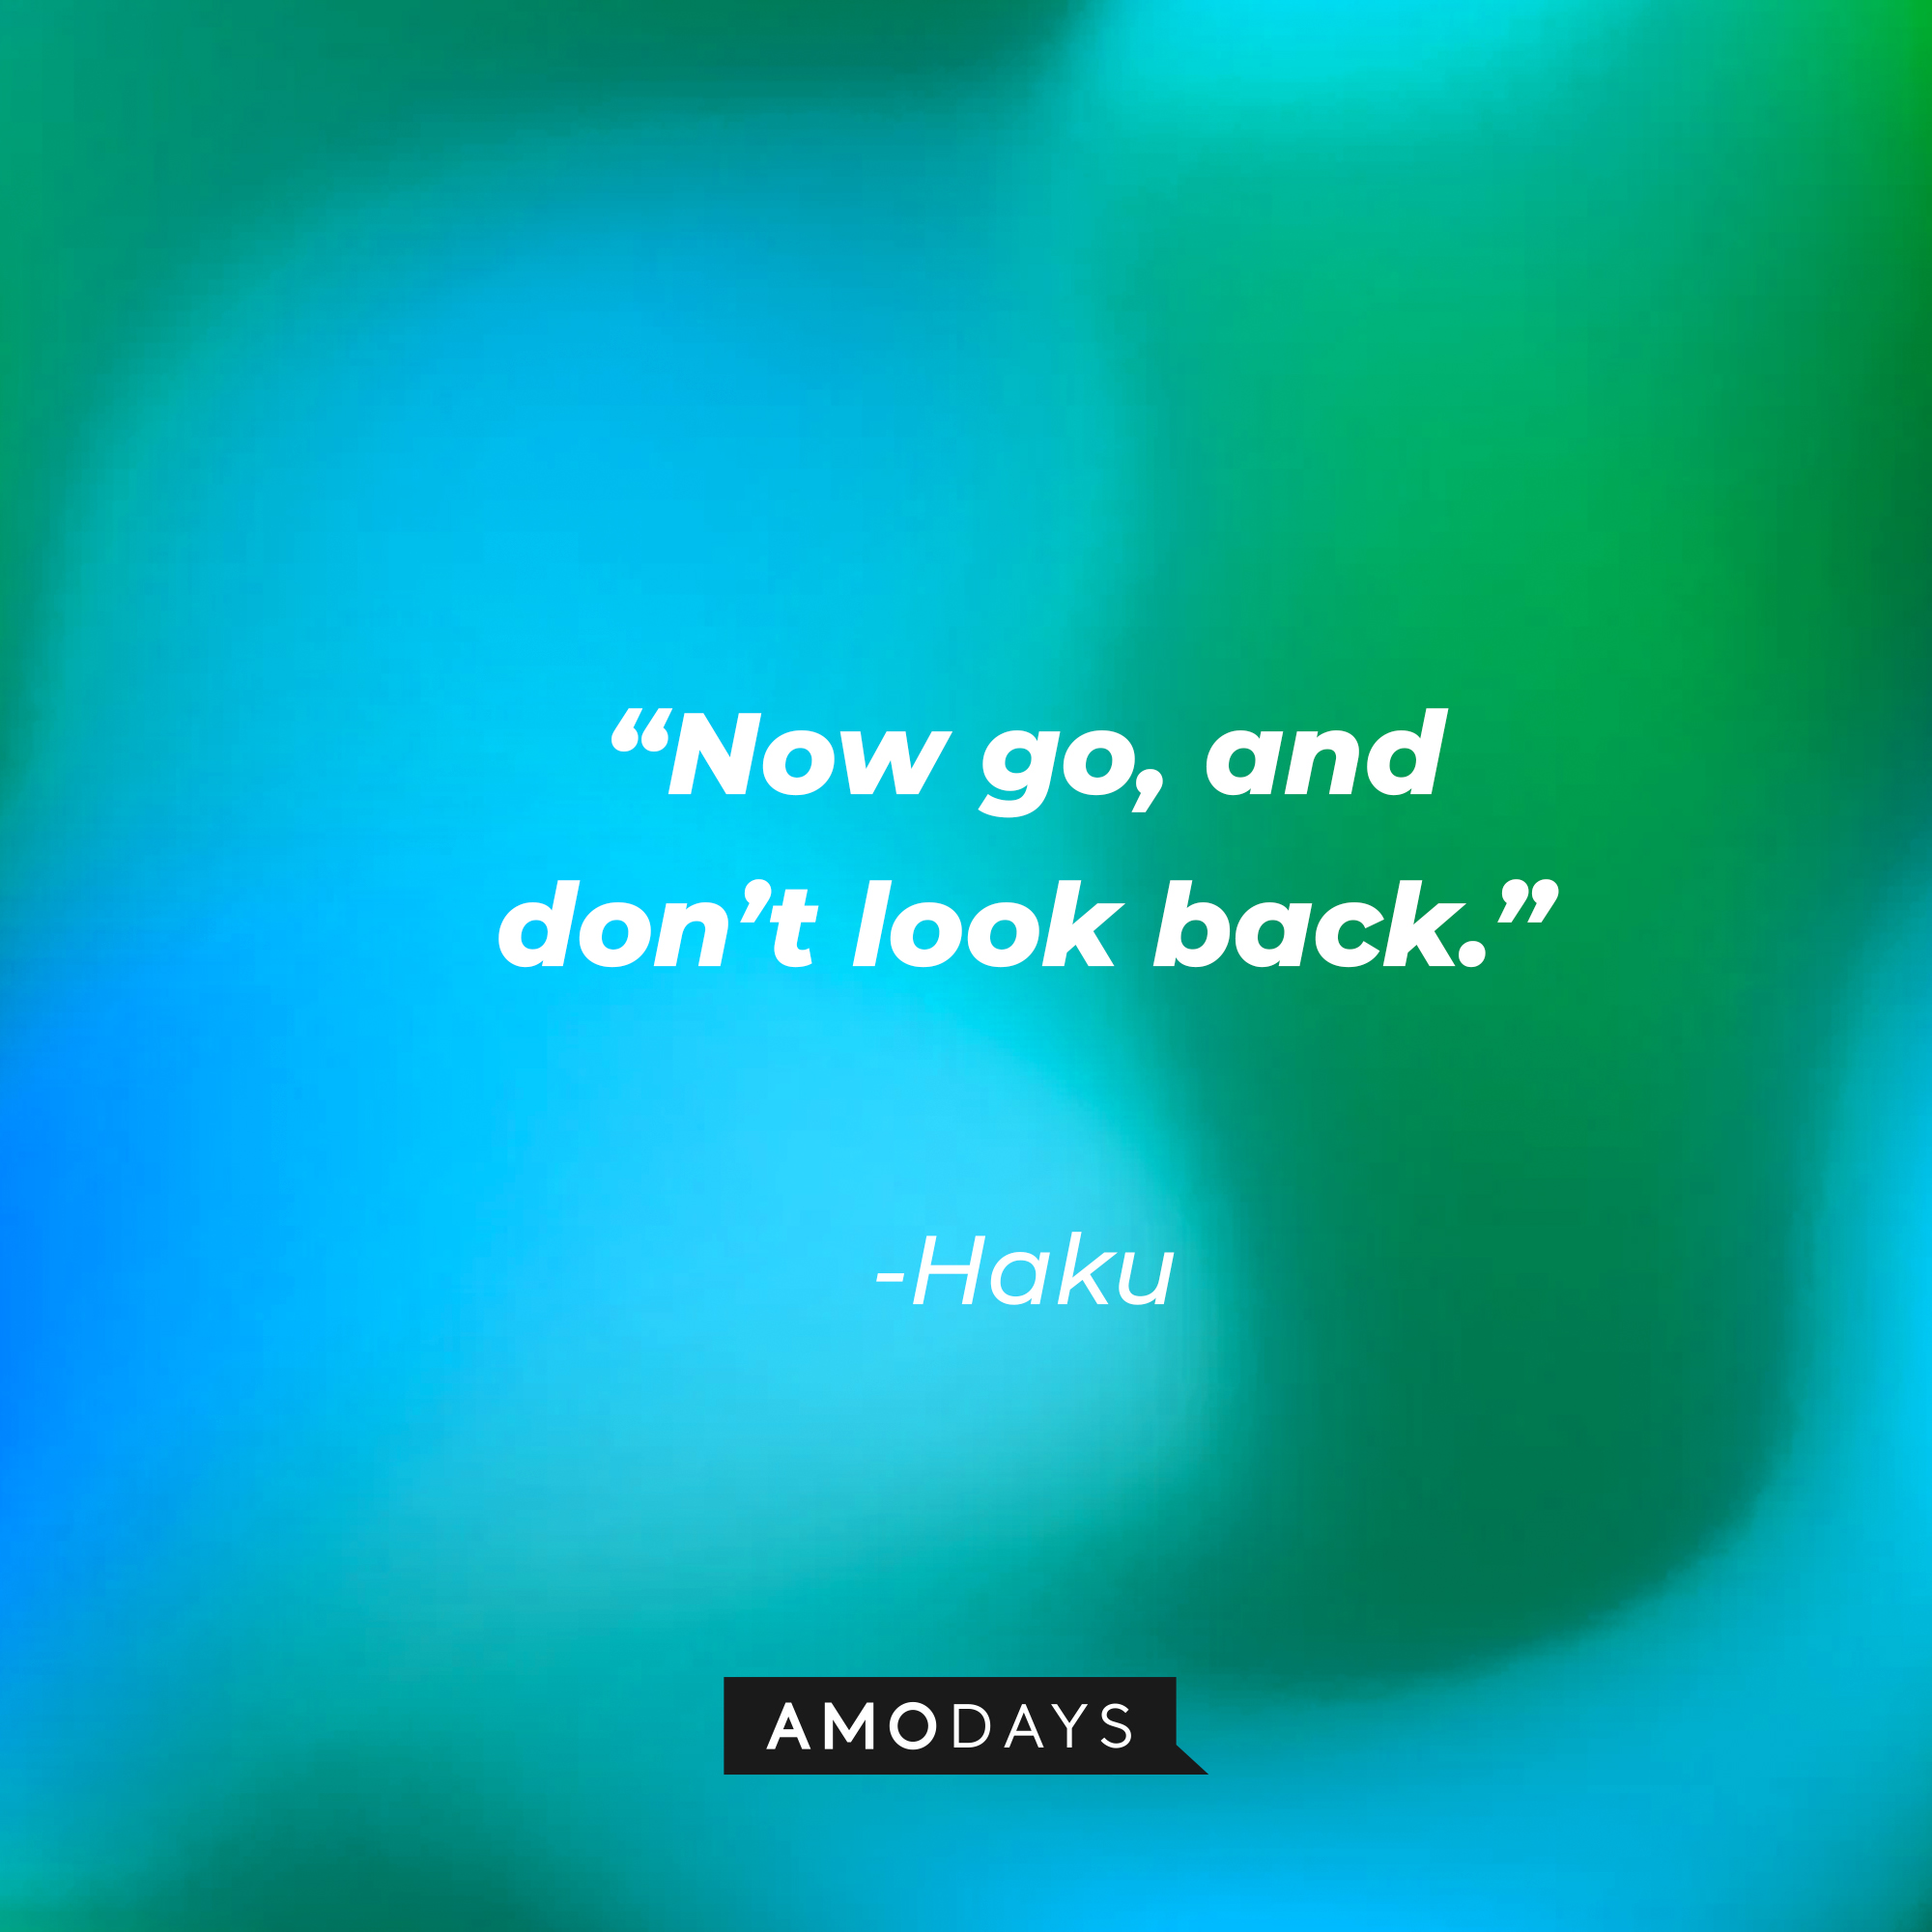 Haku’s quote: “Now go, and don’t look back.” | Source: AmoDays